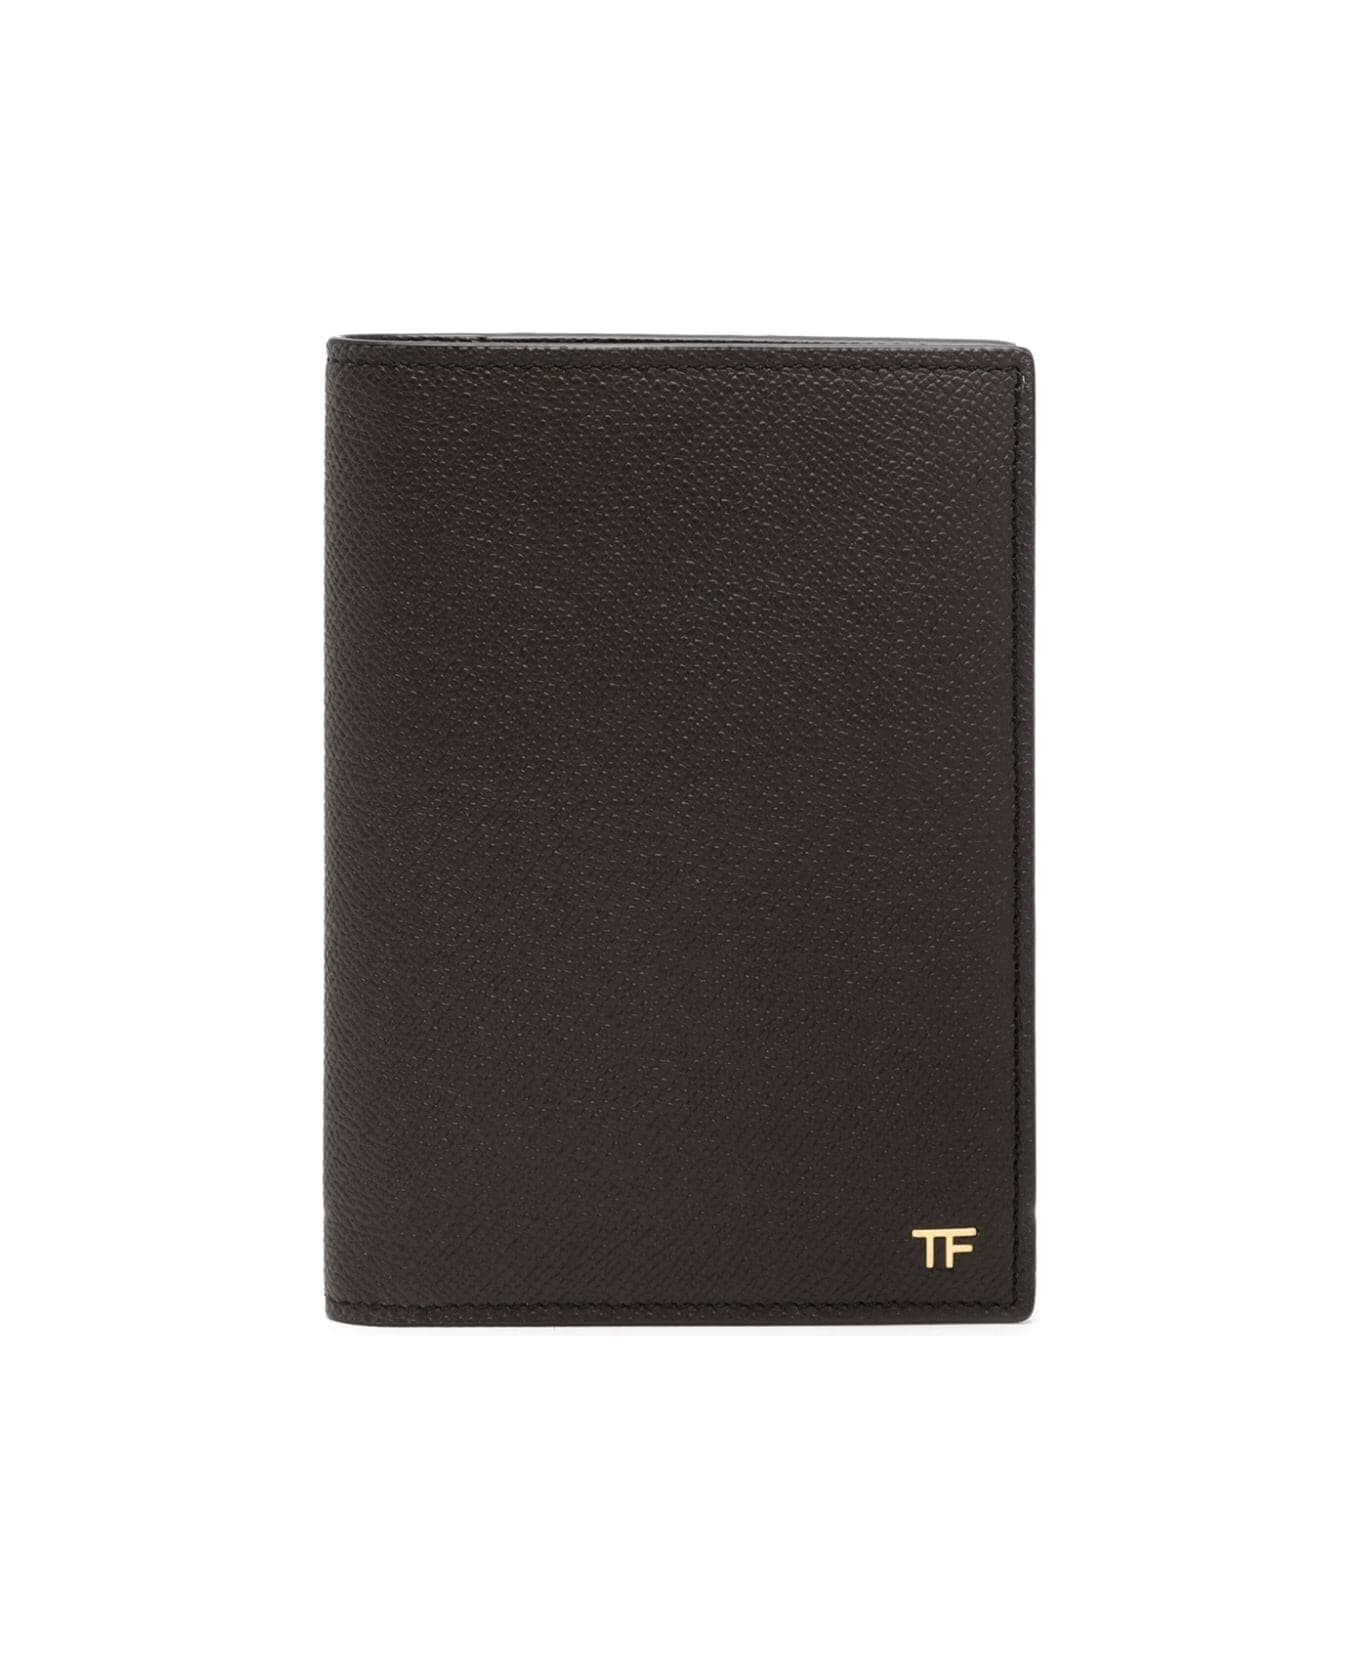 Tom Ford Stationary Wallet - Chocolate